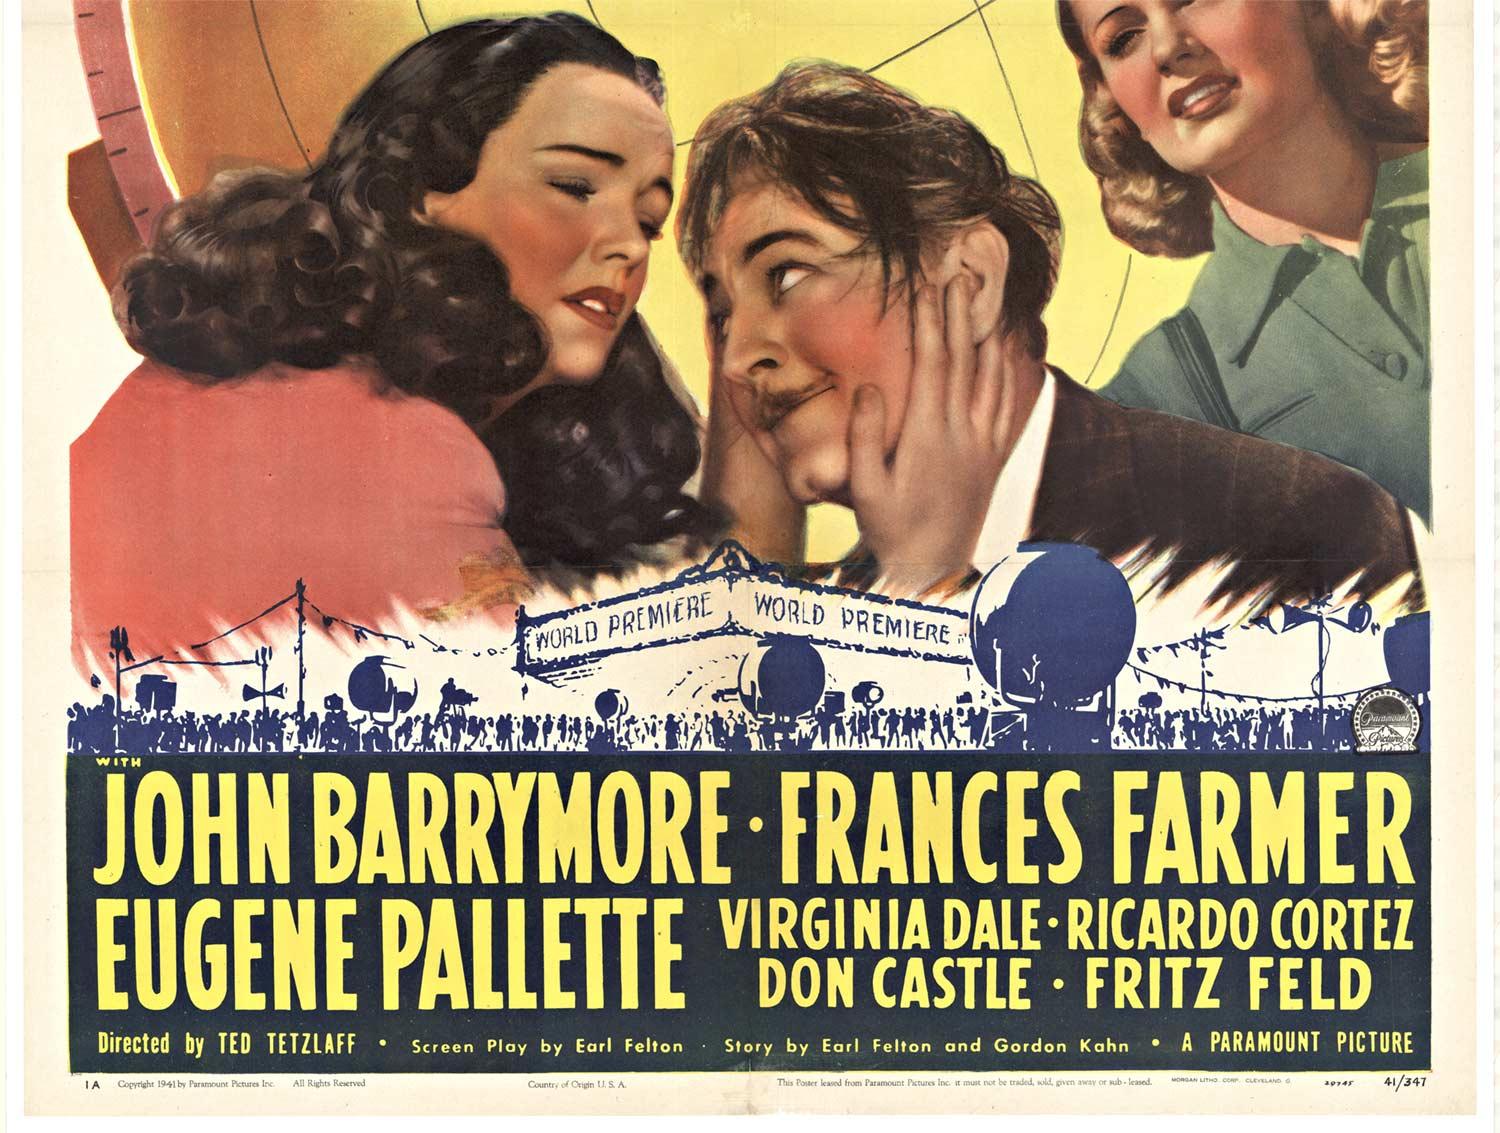 1941 poster